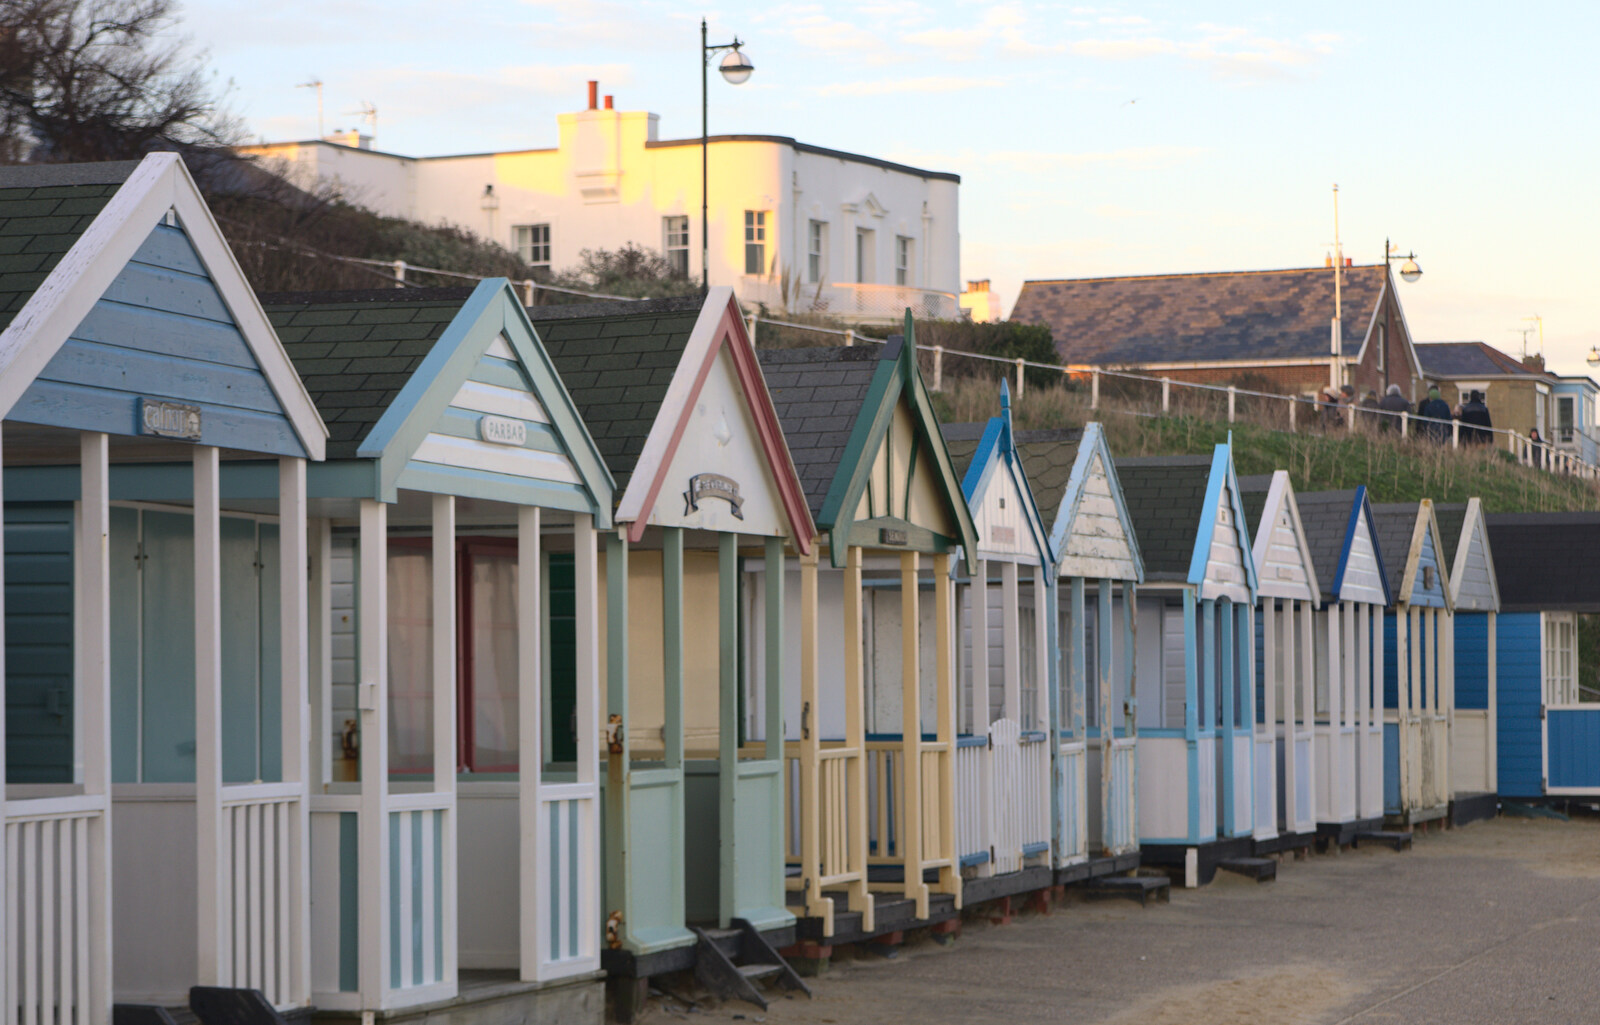 More beach huts from Sunset on the Beach, Southwold, Suffolk - 30th December 2014